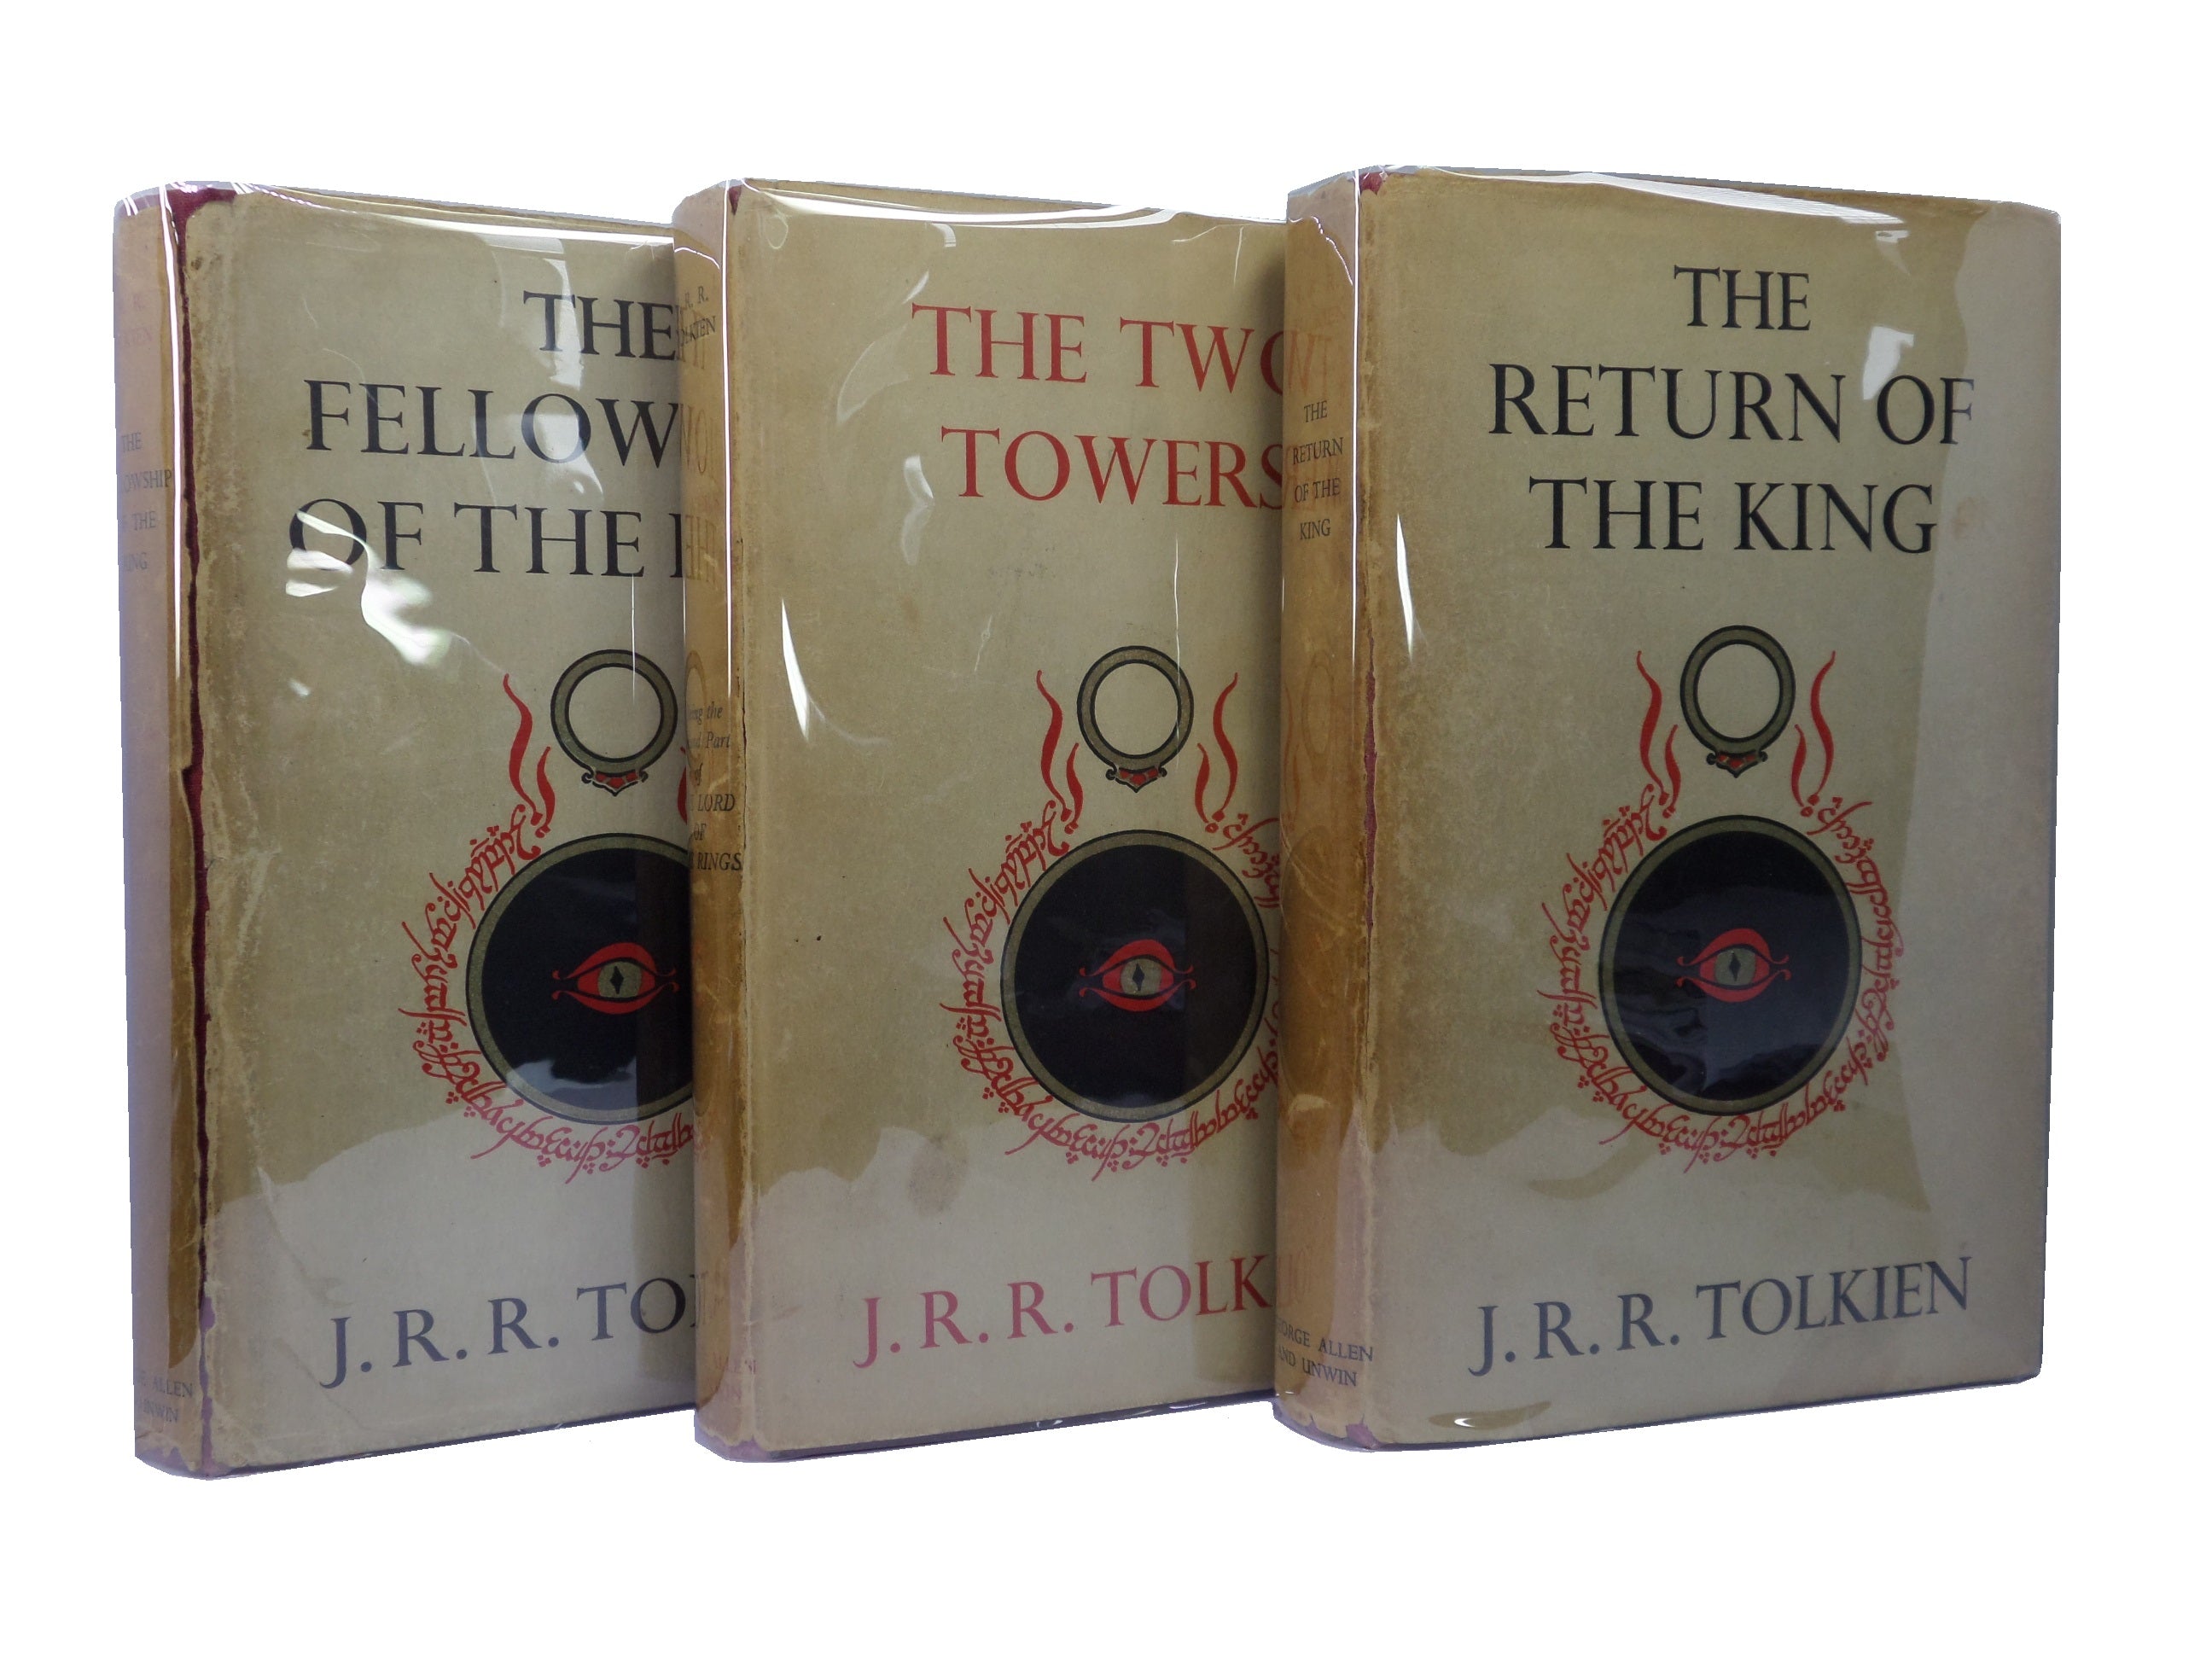 THE LORD OF THE RINGS J.R.R. TOLKIEN 1965-66 FIRST EDITION SET 15TH, 11TH, 11TH